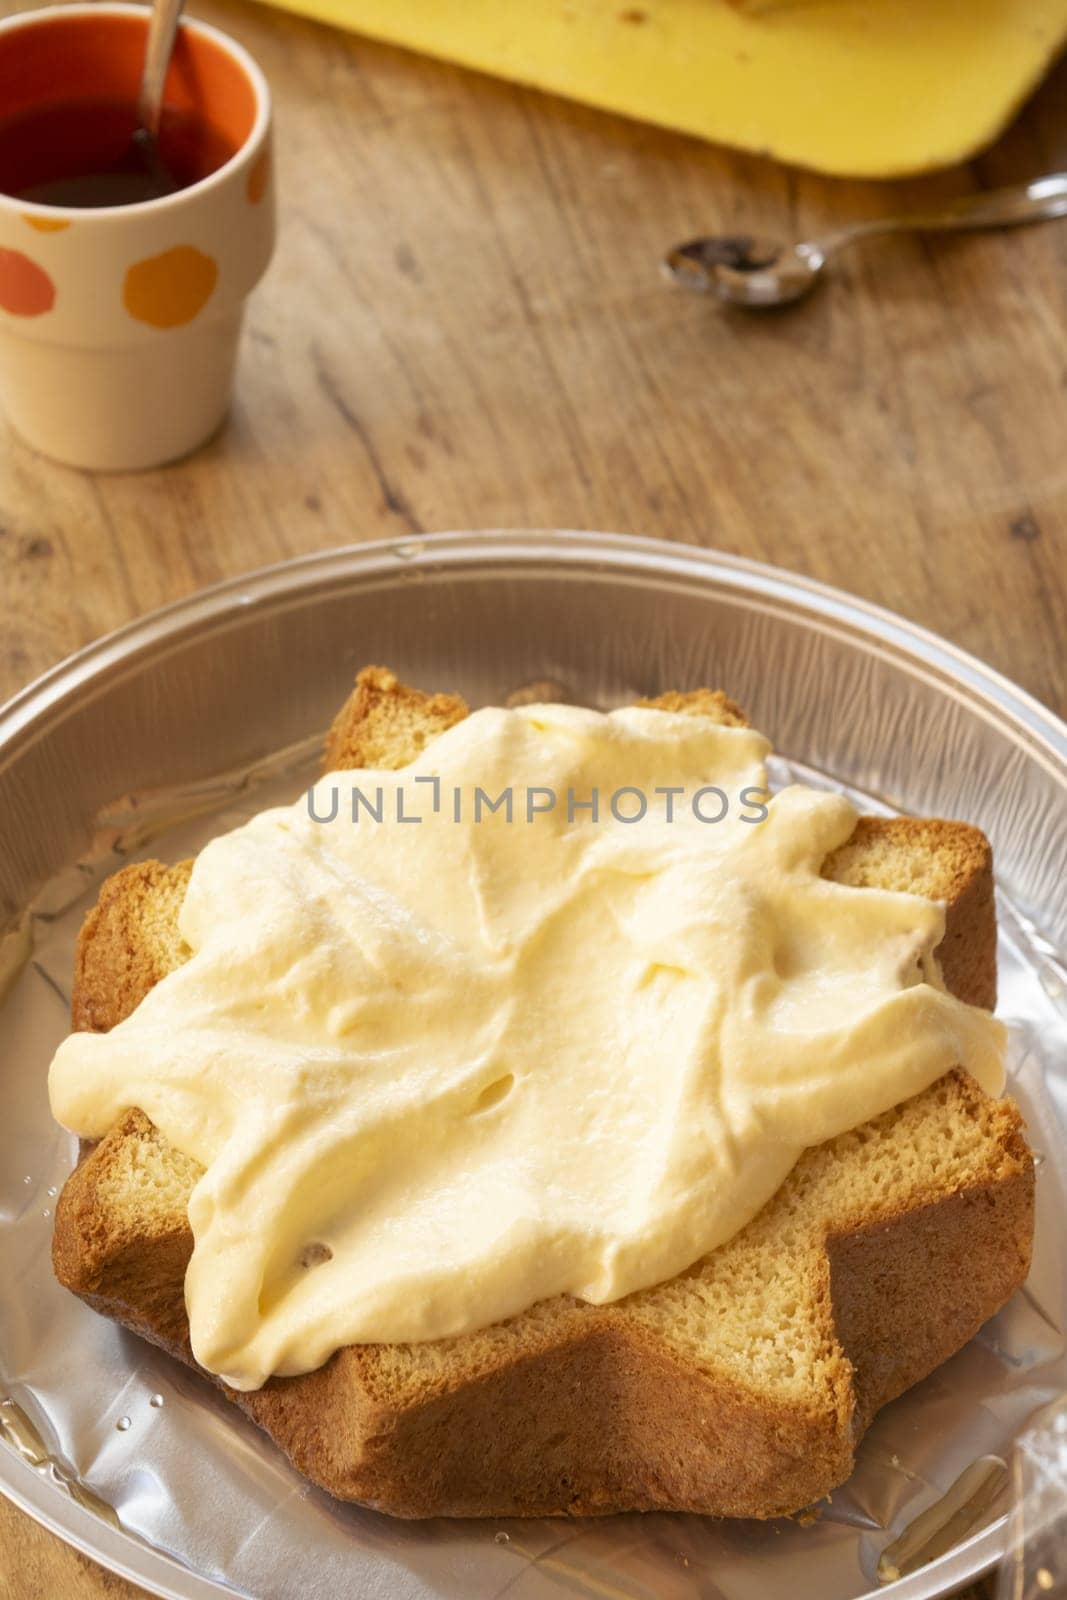 preparation of a homemade cream-filled dessert with as base a sponge cake